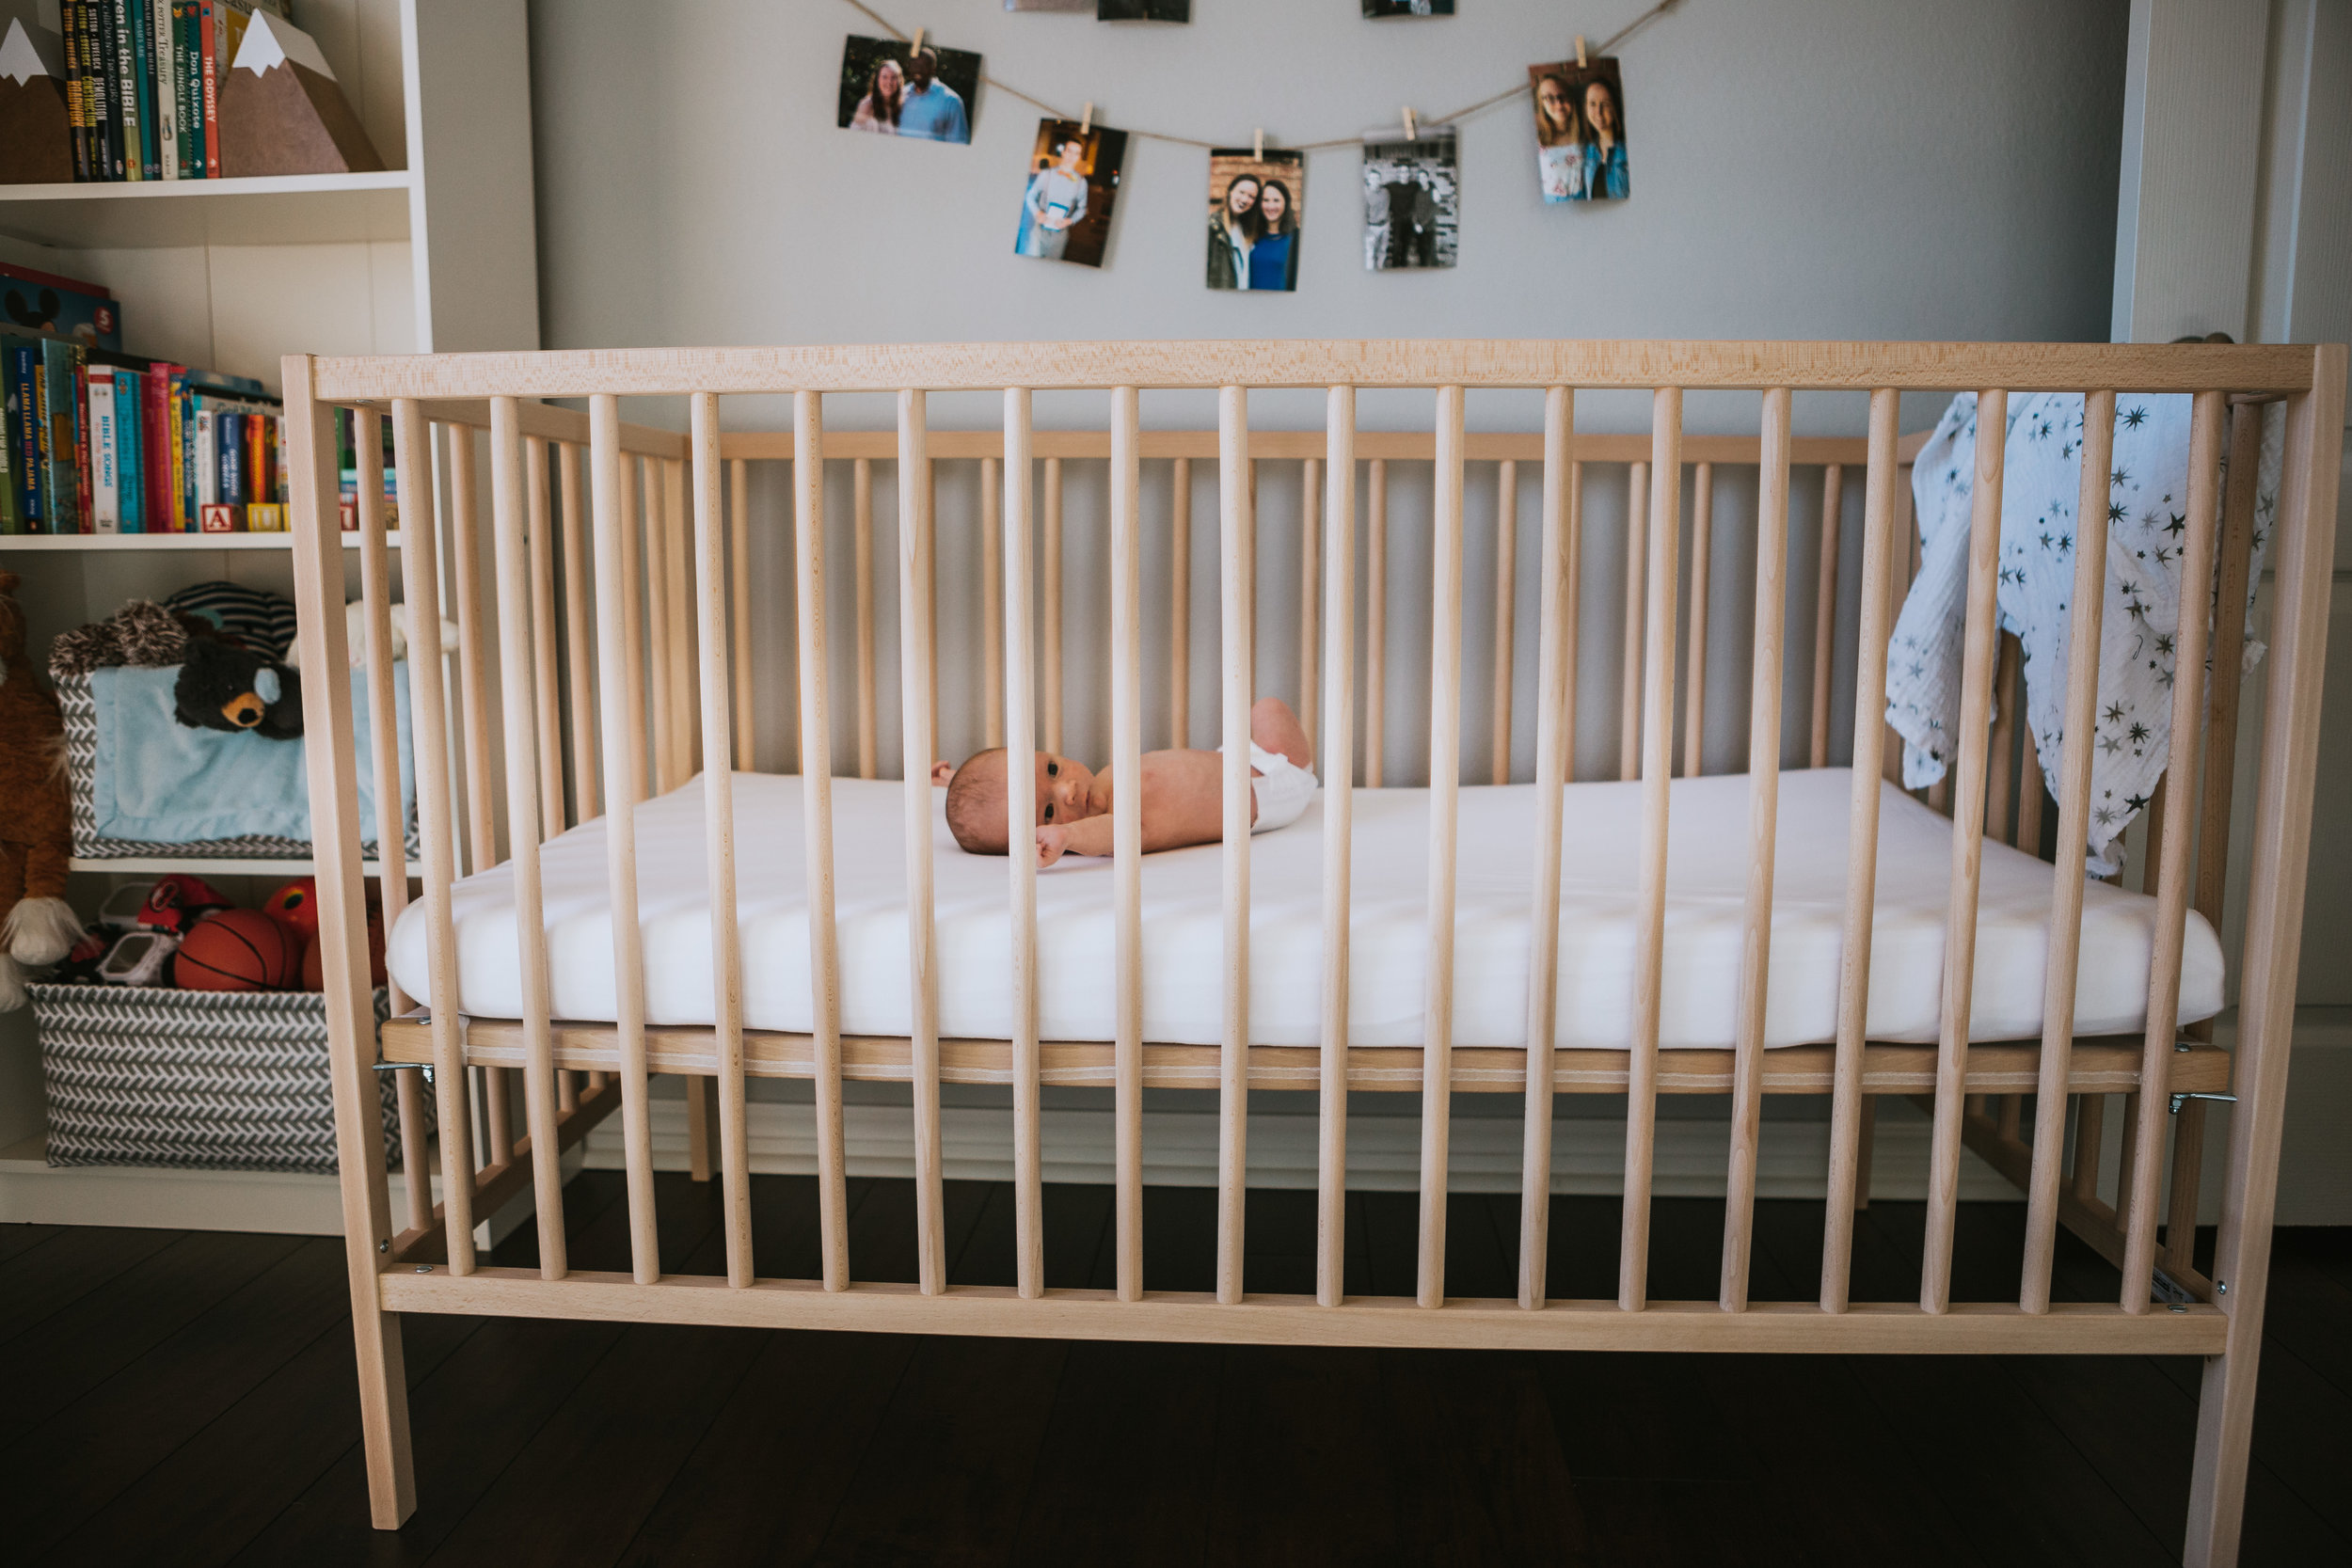  New baby in nursery crib showing where he had his first days #tealawardphotography #texasnewbornphotographysession #amarillophotographer #amarilloenewbornphotographer #emotionalphotography #lifestylephotography #inhomesession #lifestyles #newbaby #newfamilyofthree #sweetbaby #nurseryphotos 